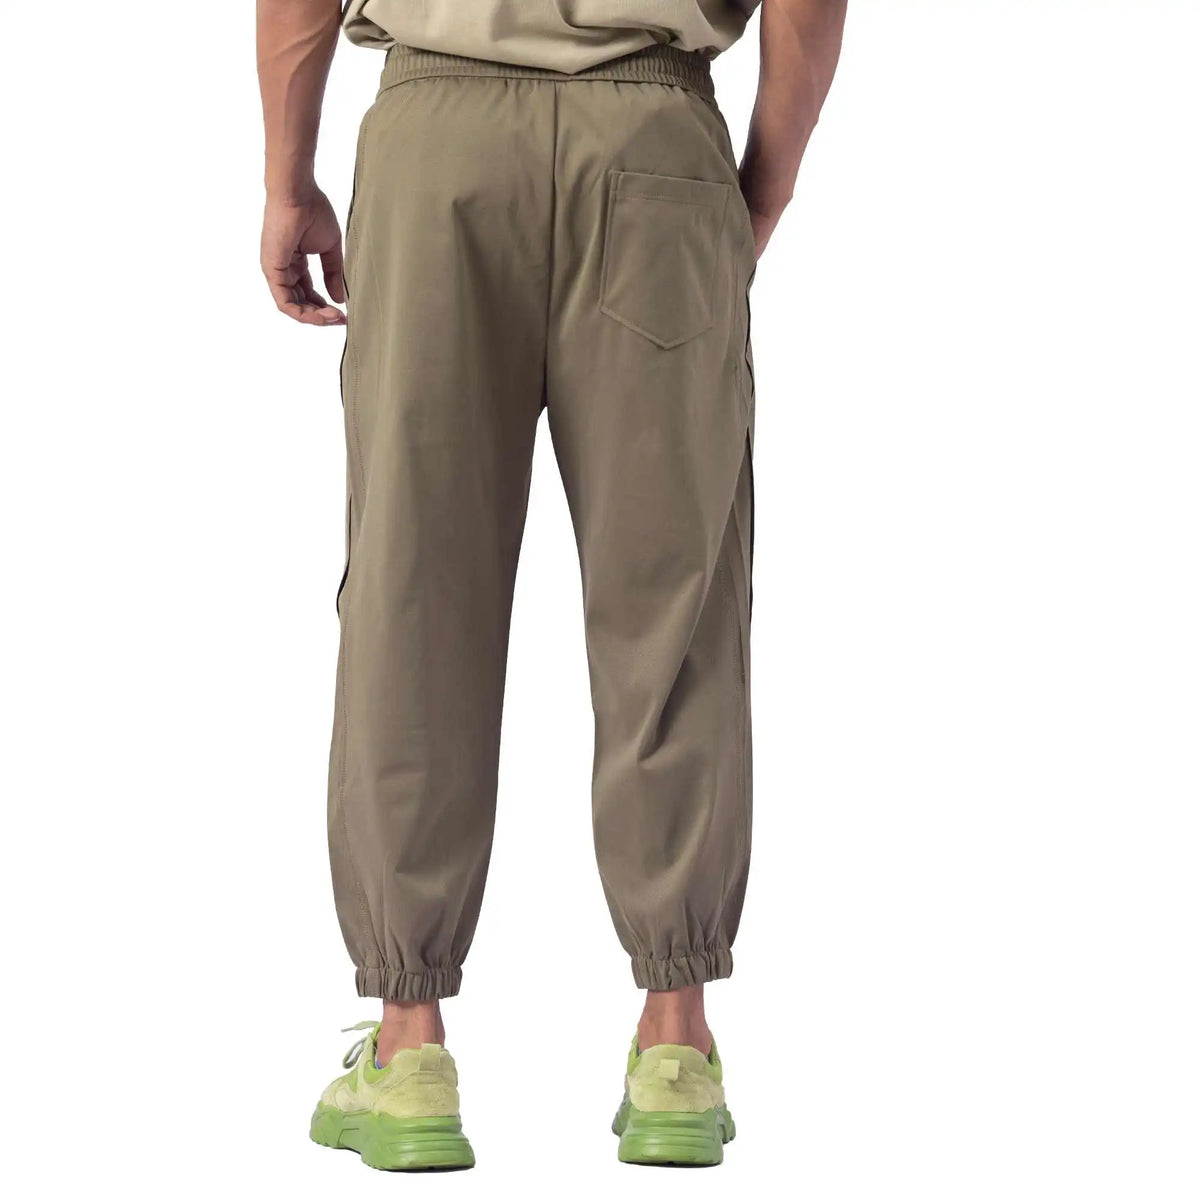 Ankle-Tied Causal Pants For Men